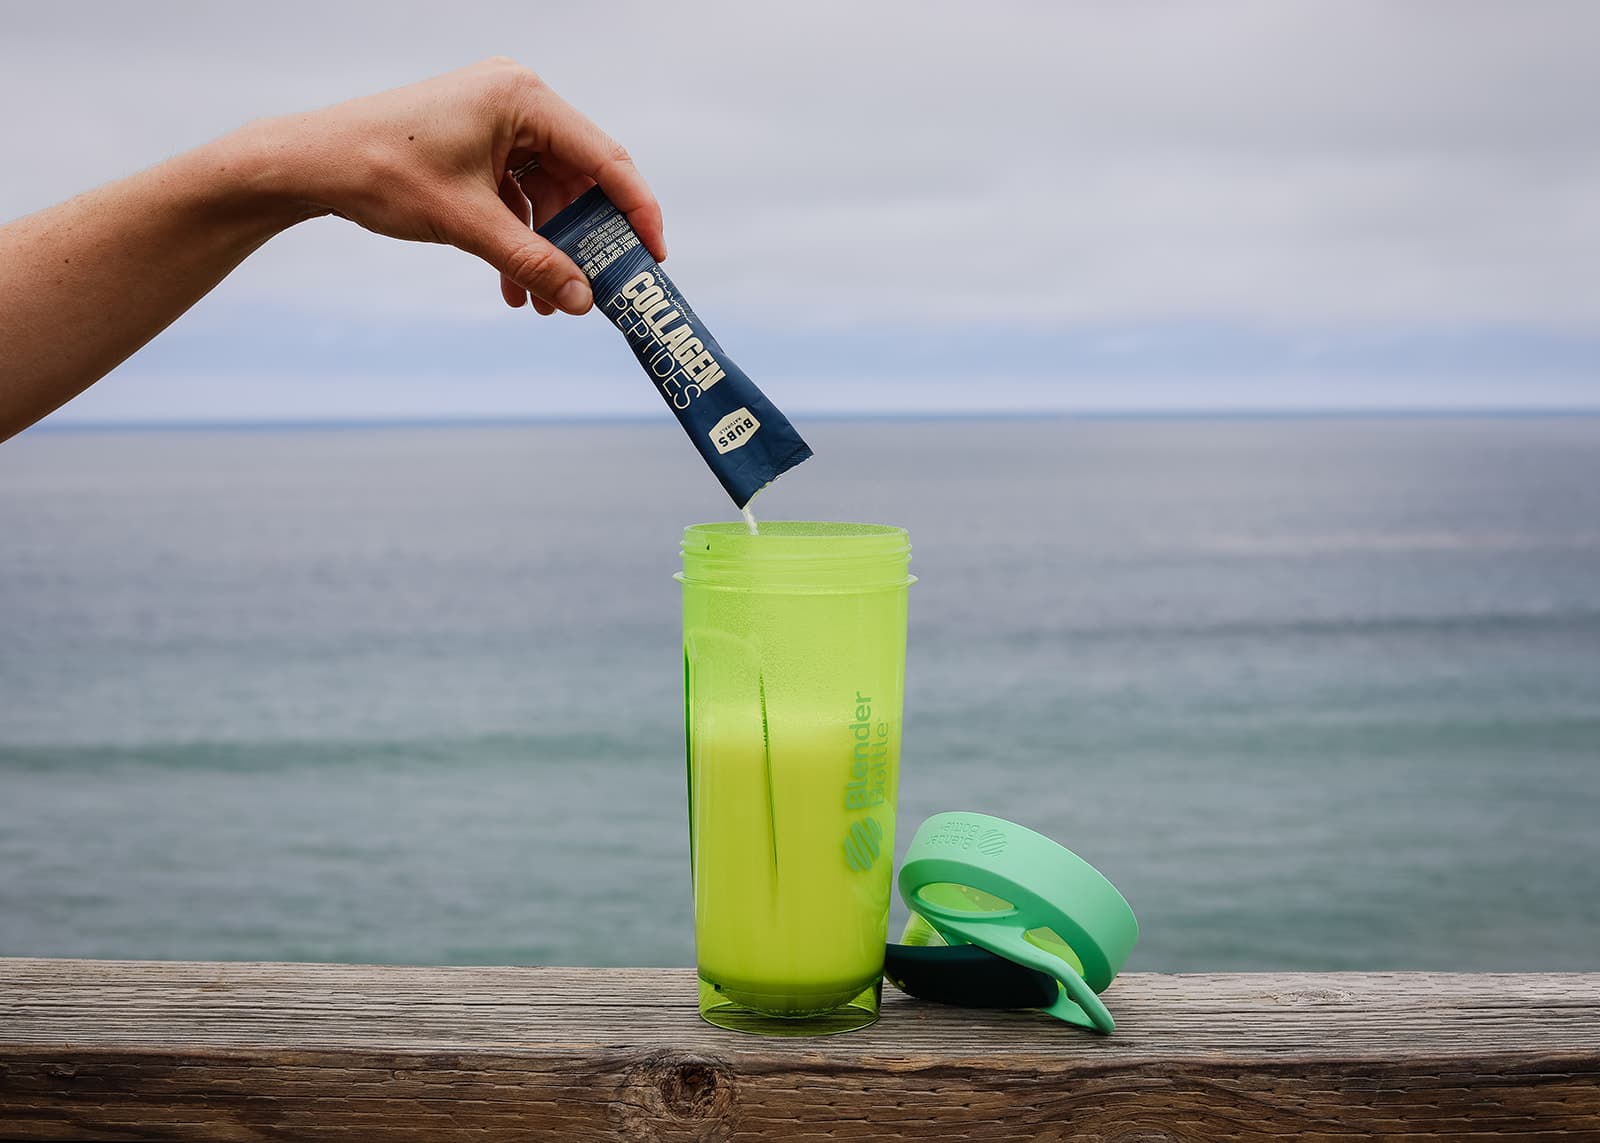 BUBS Naturals Collagen Peptides being poured into a green blender bottle overlooking the ocean